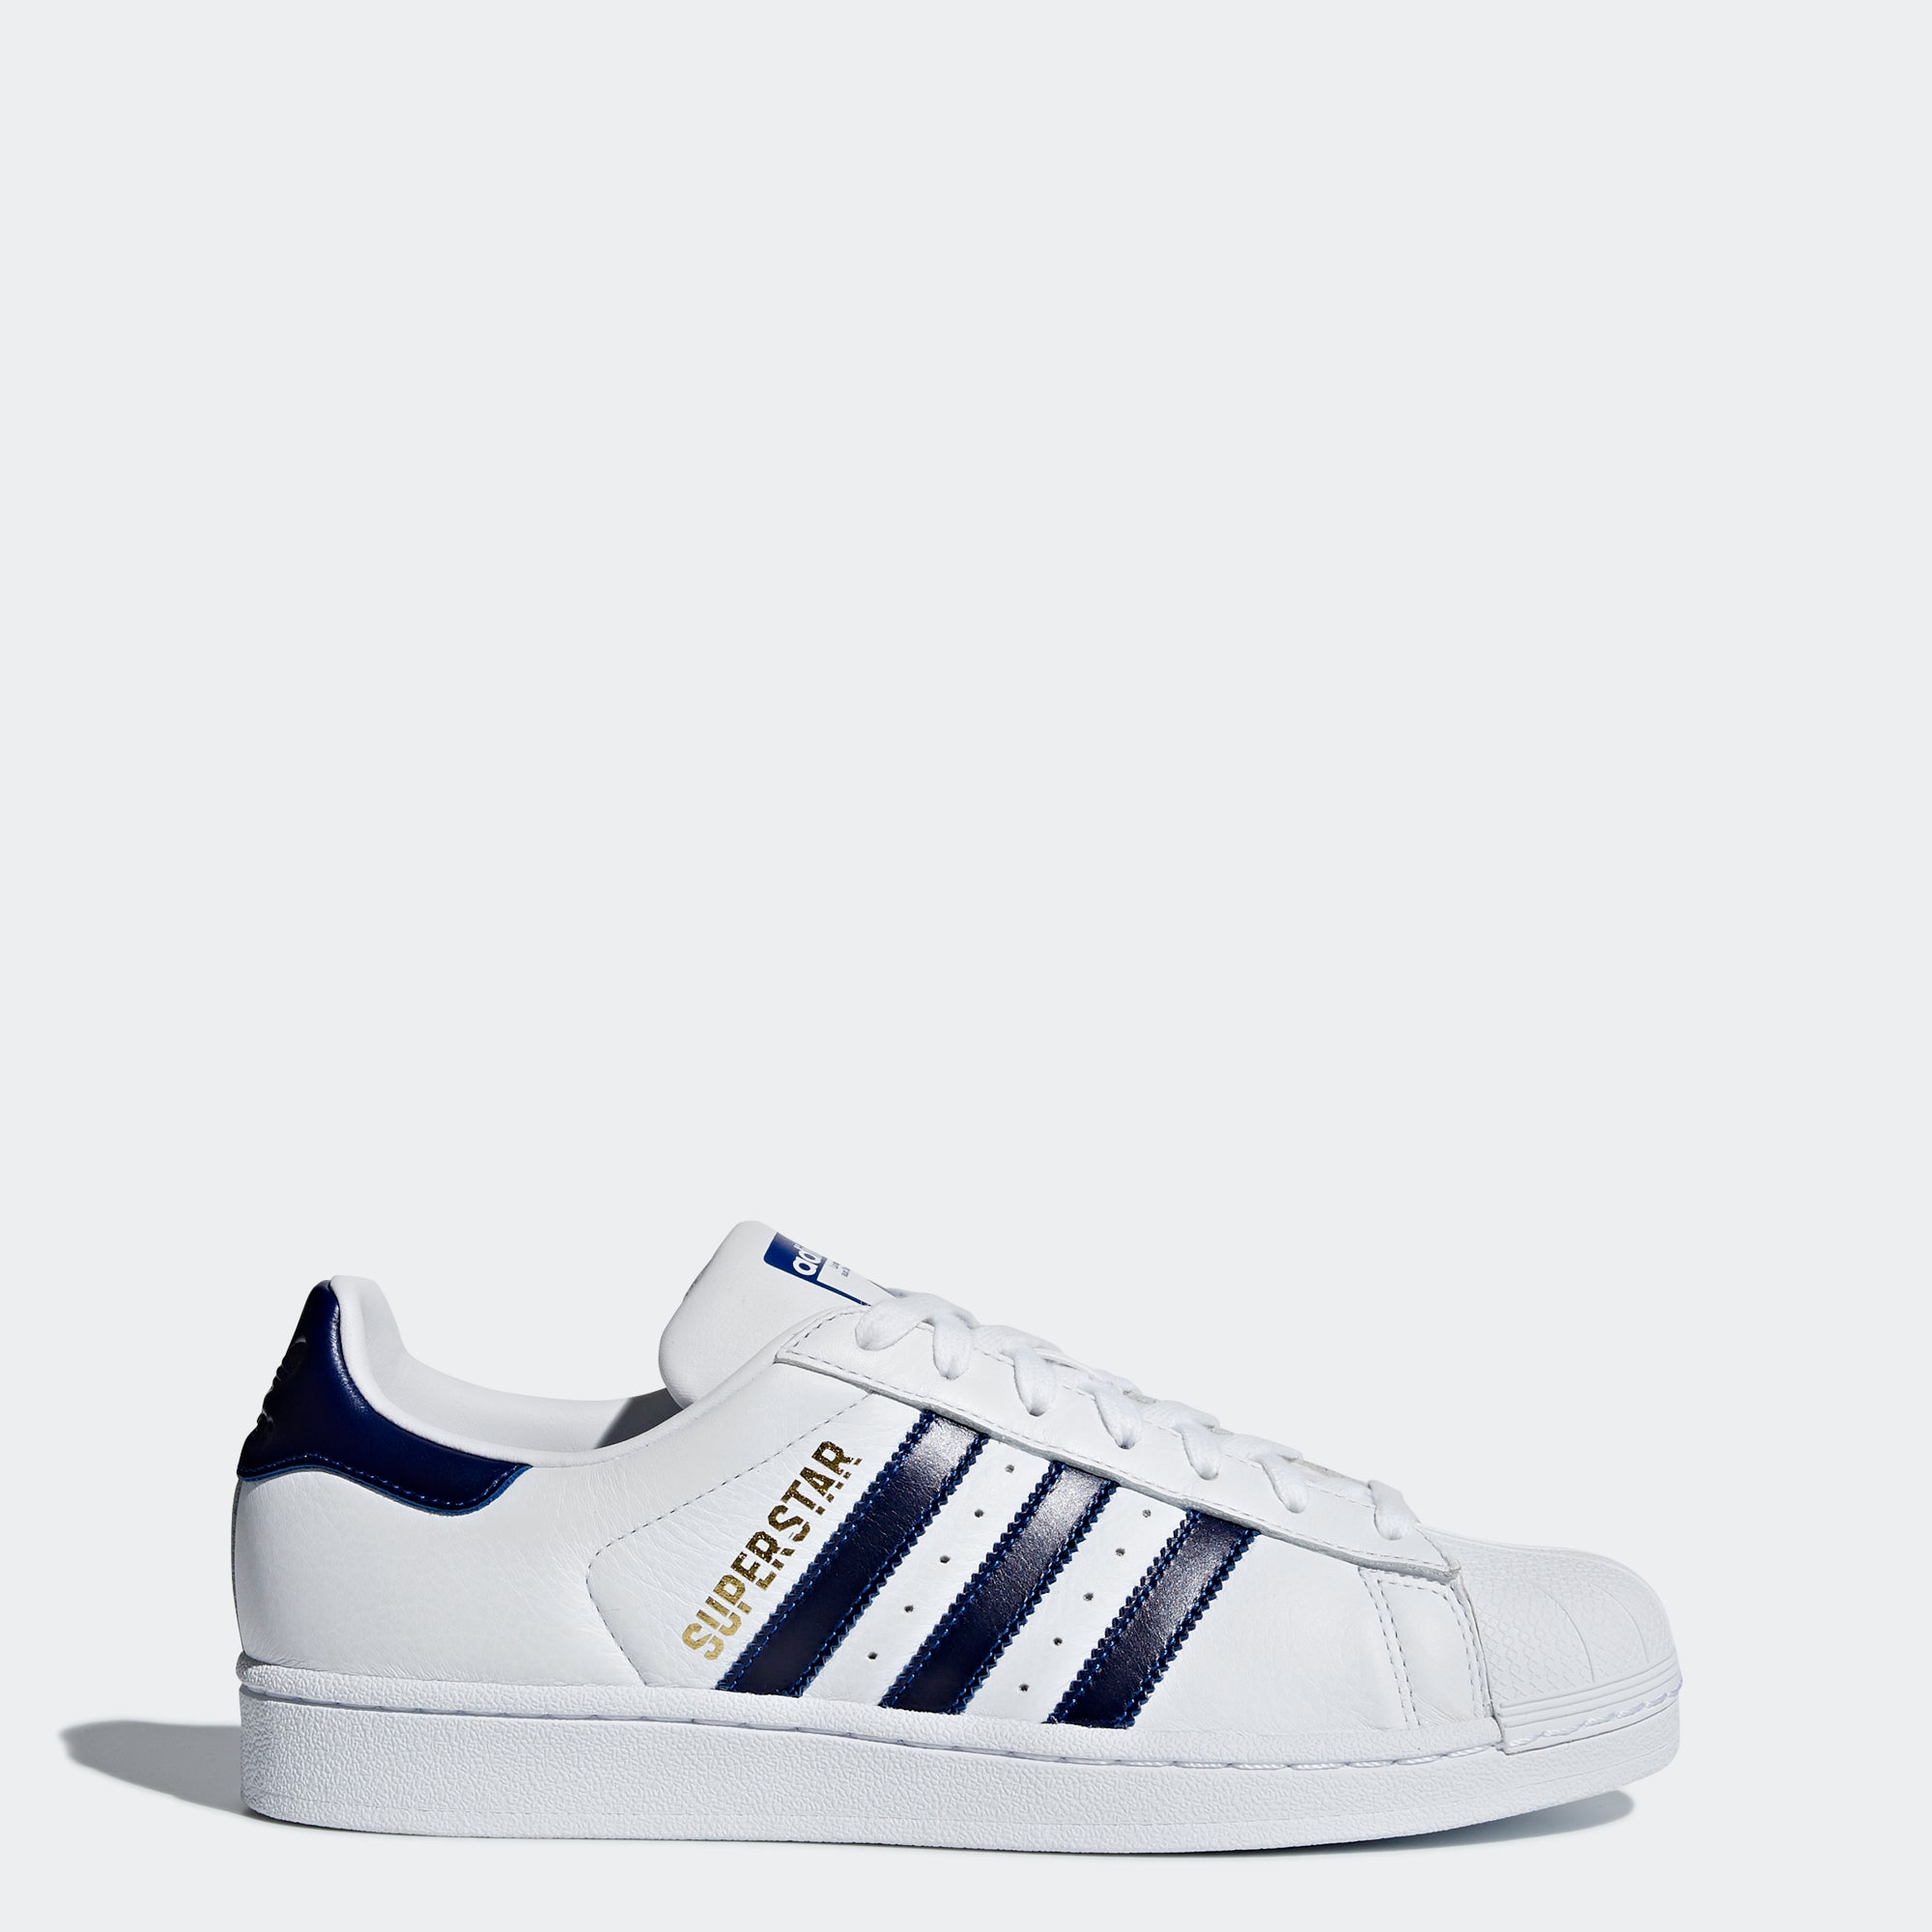 white and navy adidas shoes